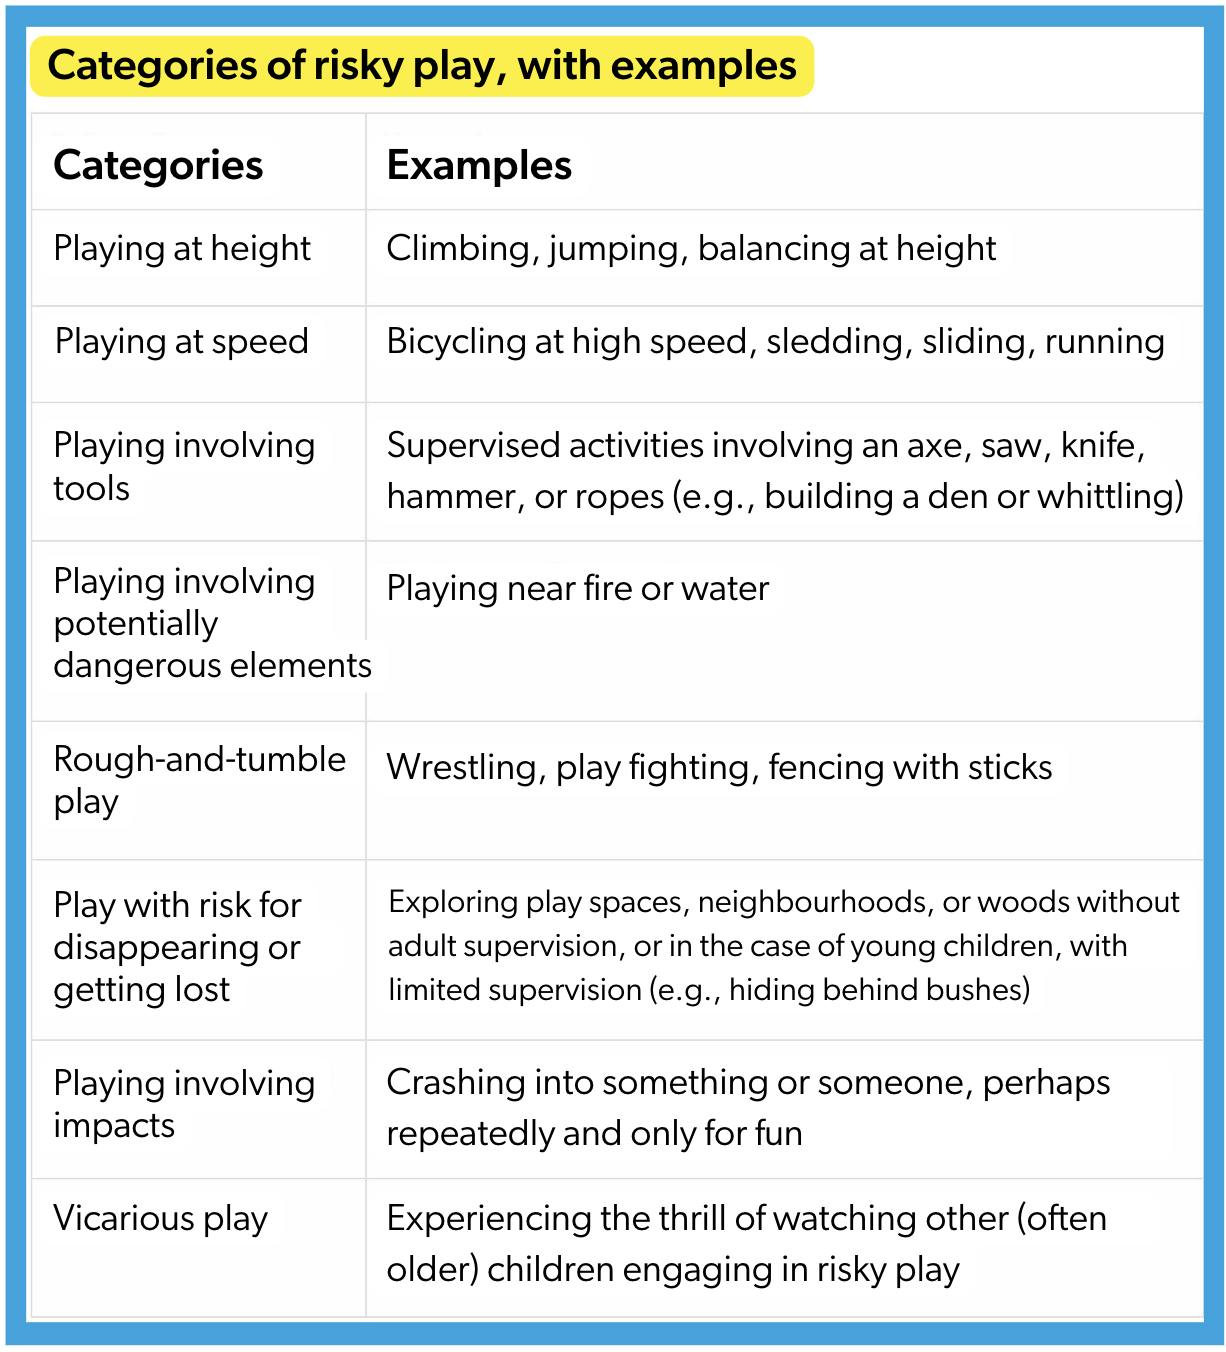 screenshot of a table showing the Canadian Pediatric Association's new guidelines for risky play among young children